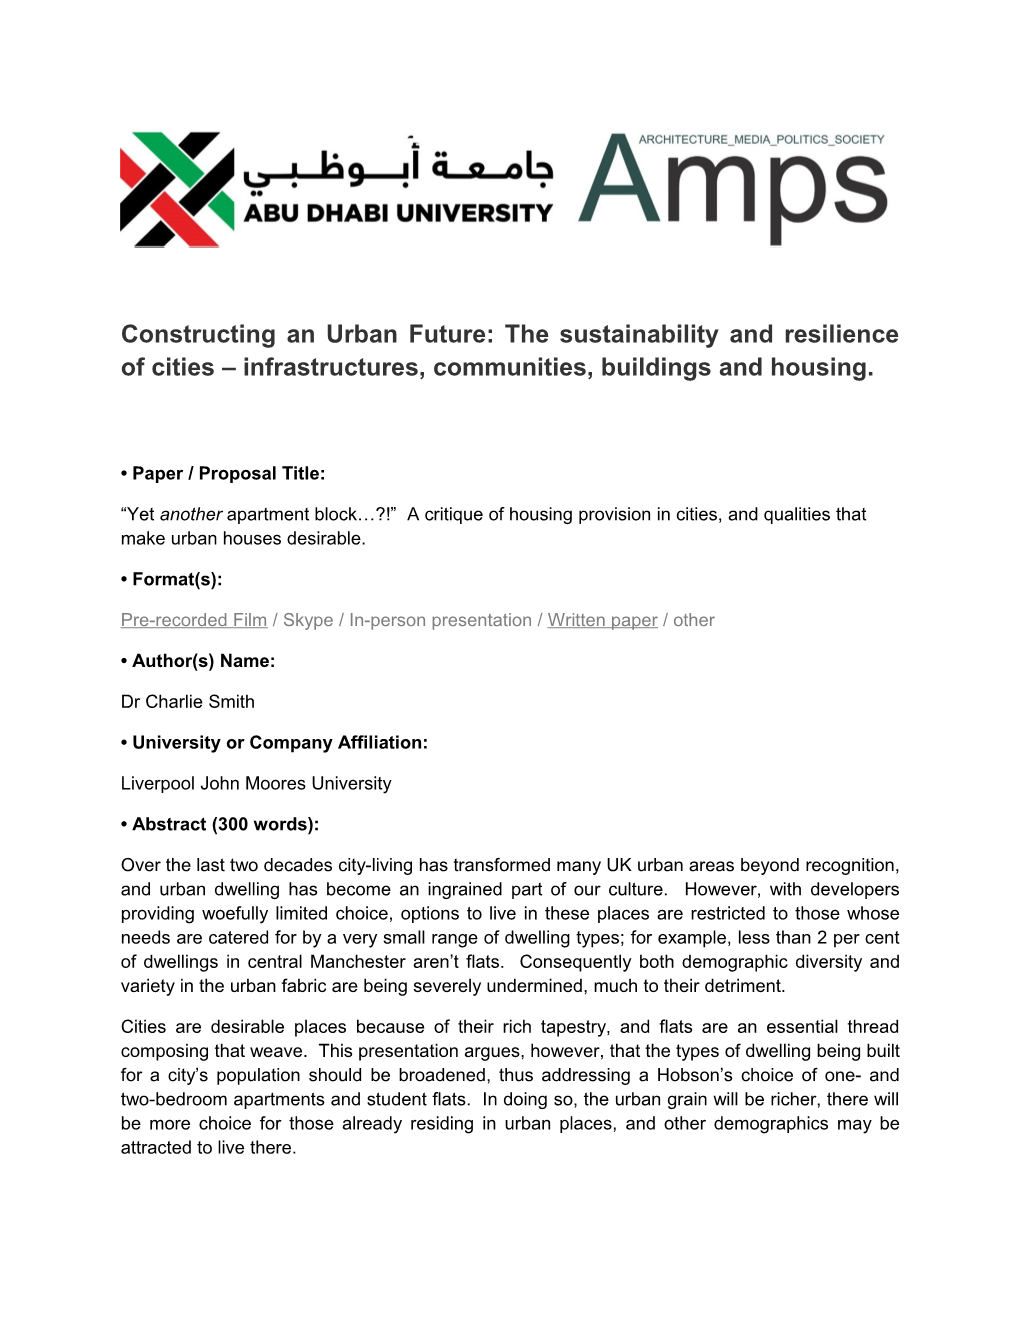 Constructing an Urban Future: the Sustainability and Resilience of Cities Infrastructures